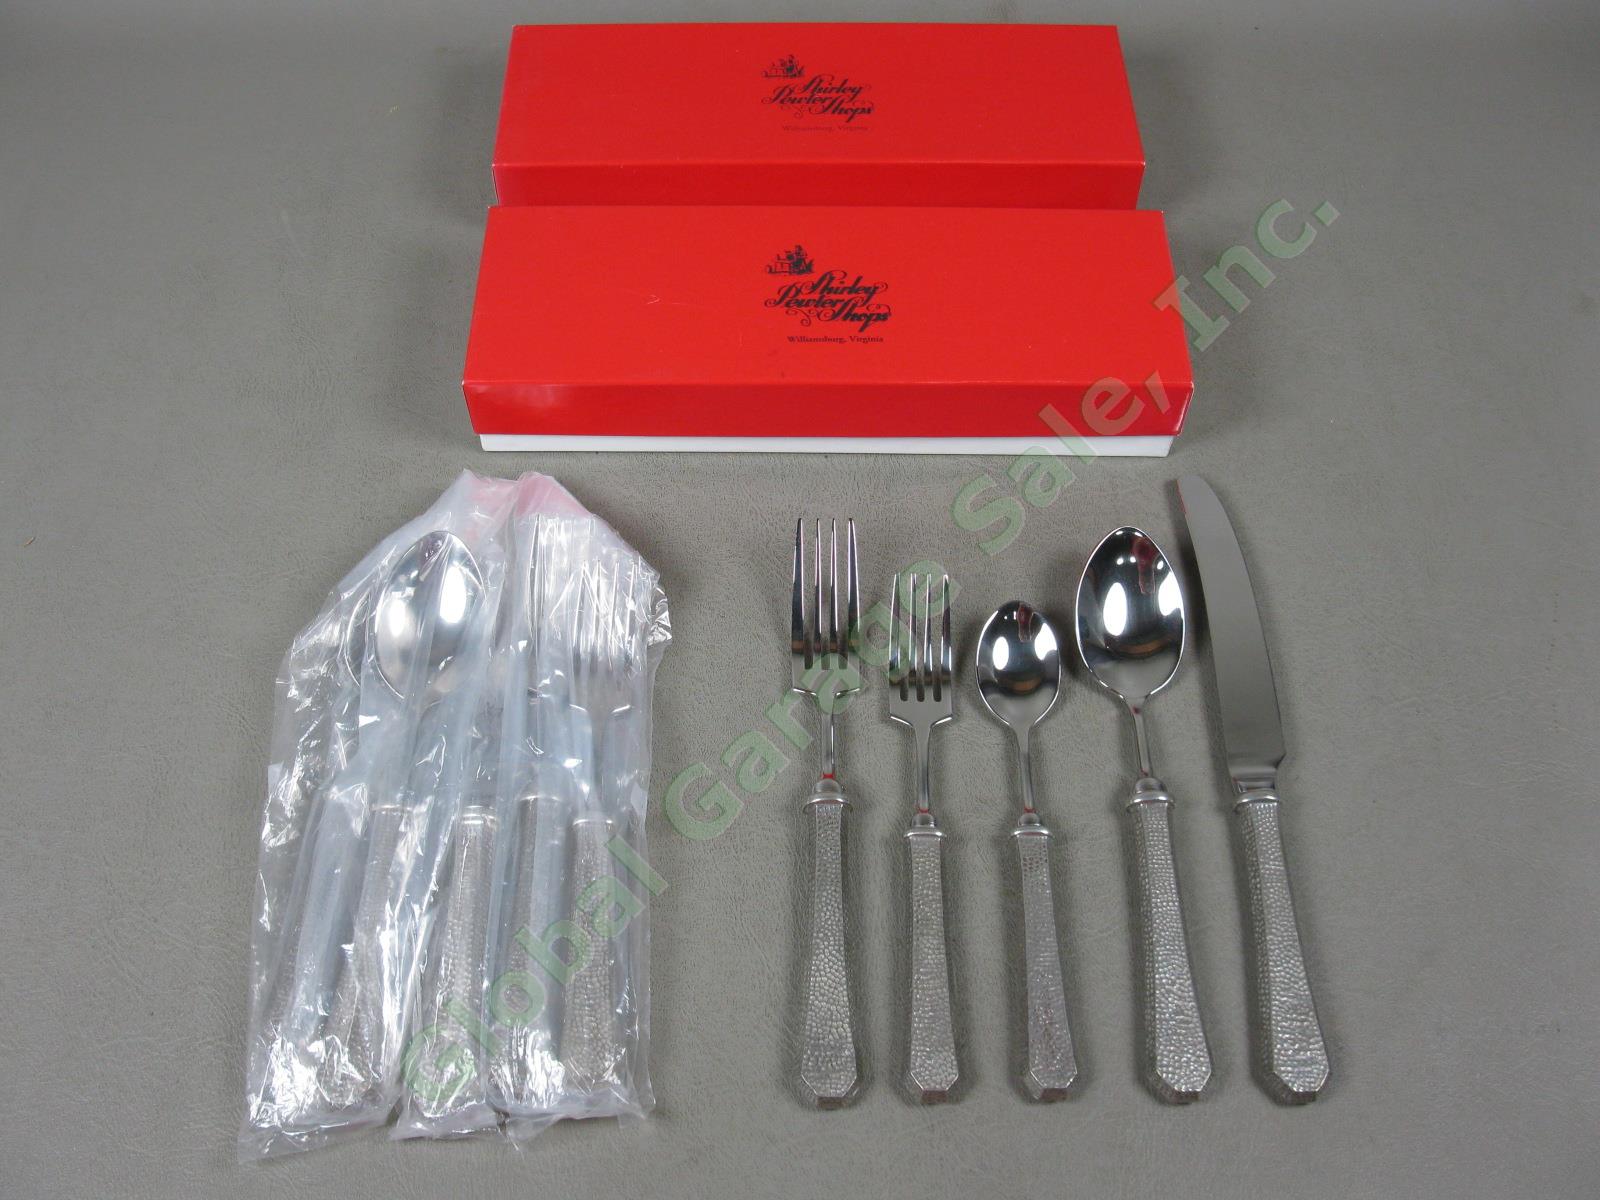 2 NEW 5-Piece Vagabond House Classic Hammered Pewter Flatware Place Settings NR!